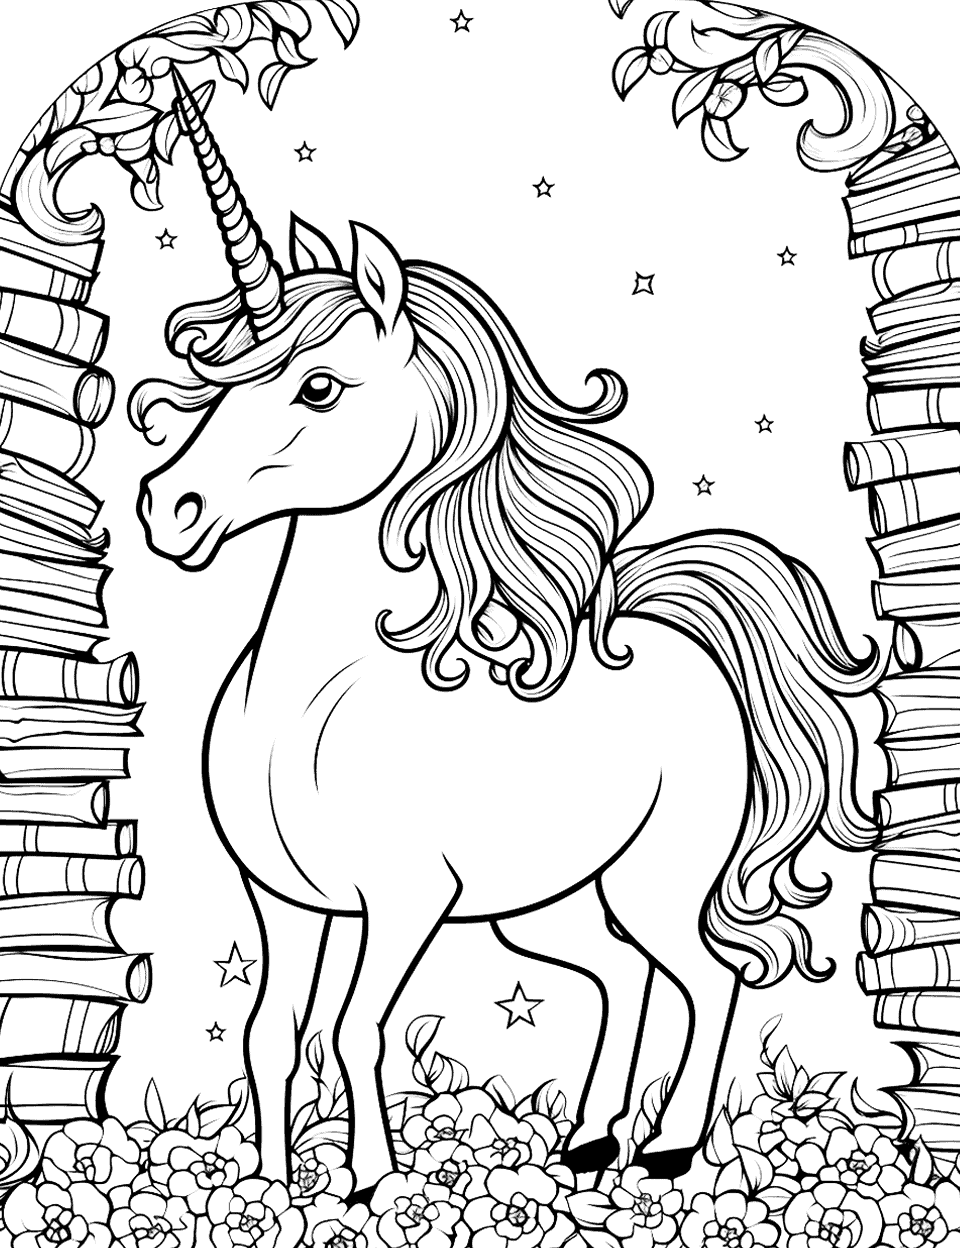 Unicorn in a Magical Library Coloring Page - A unicorn exploring a magical library filled with books.